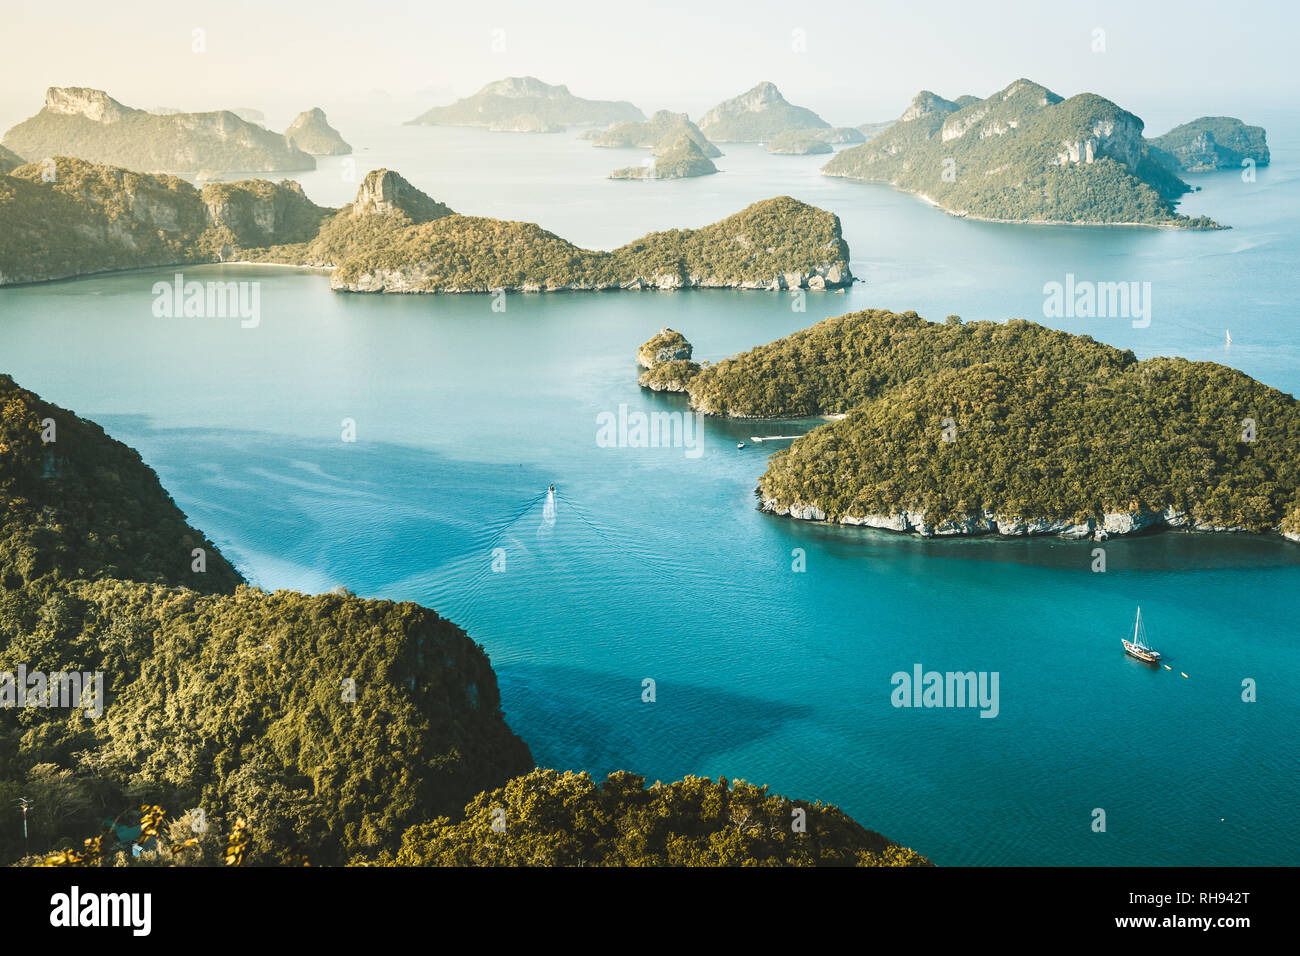 Amazing view of the Ang Thong National Park, Thailand Stock Photo